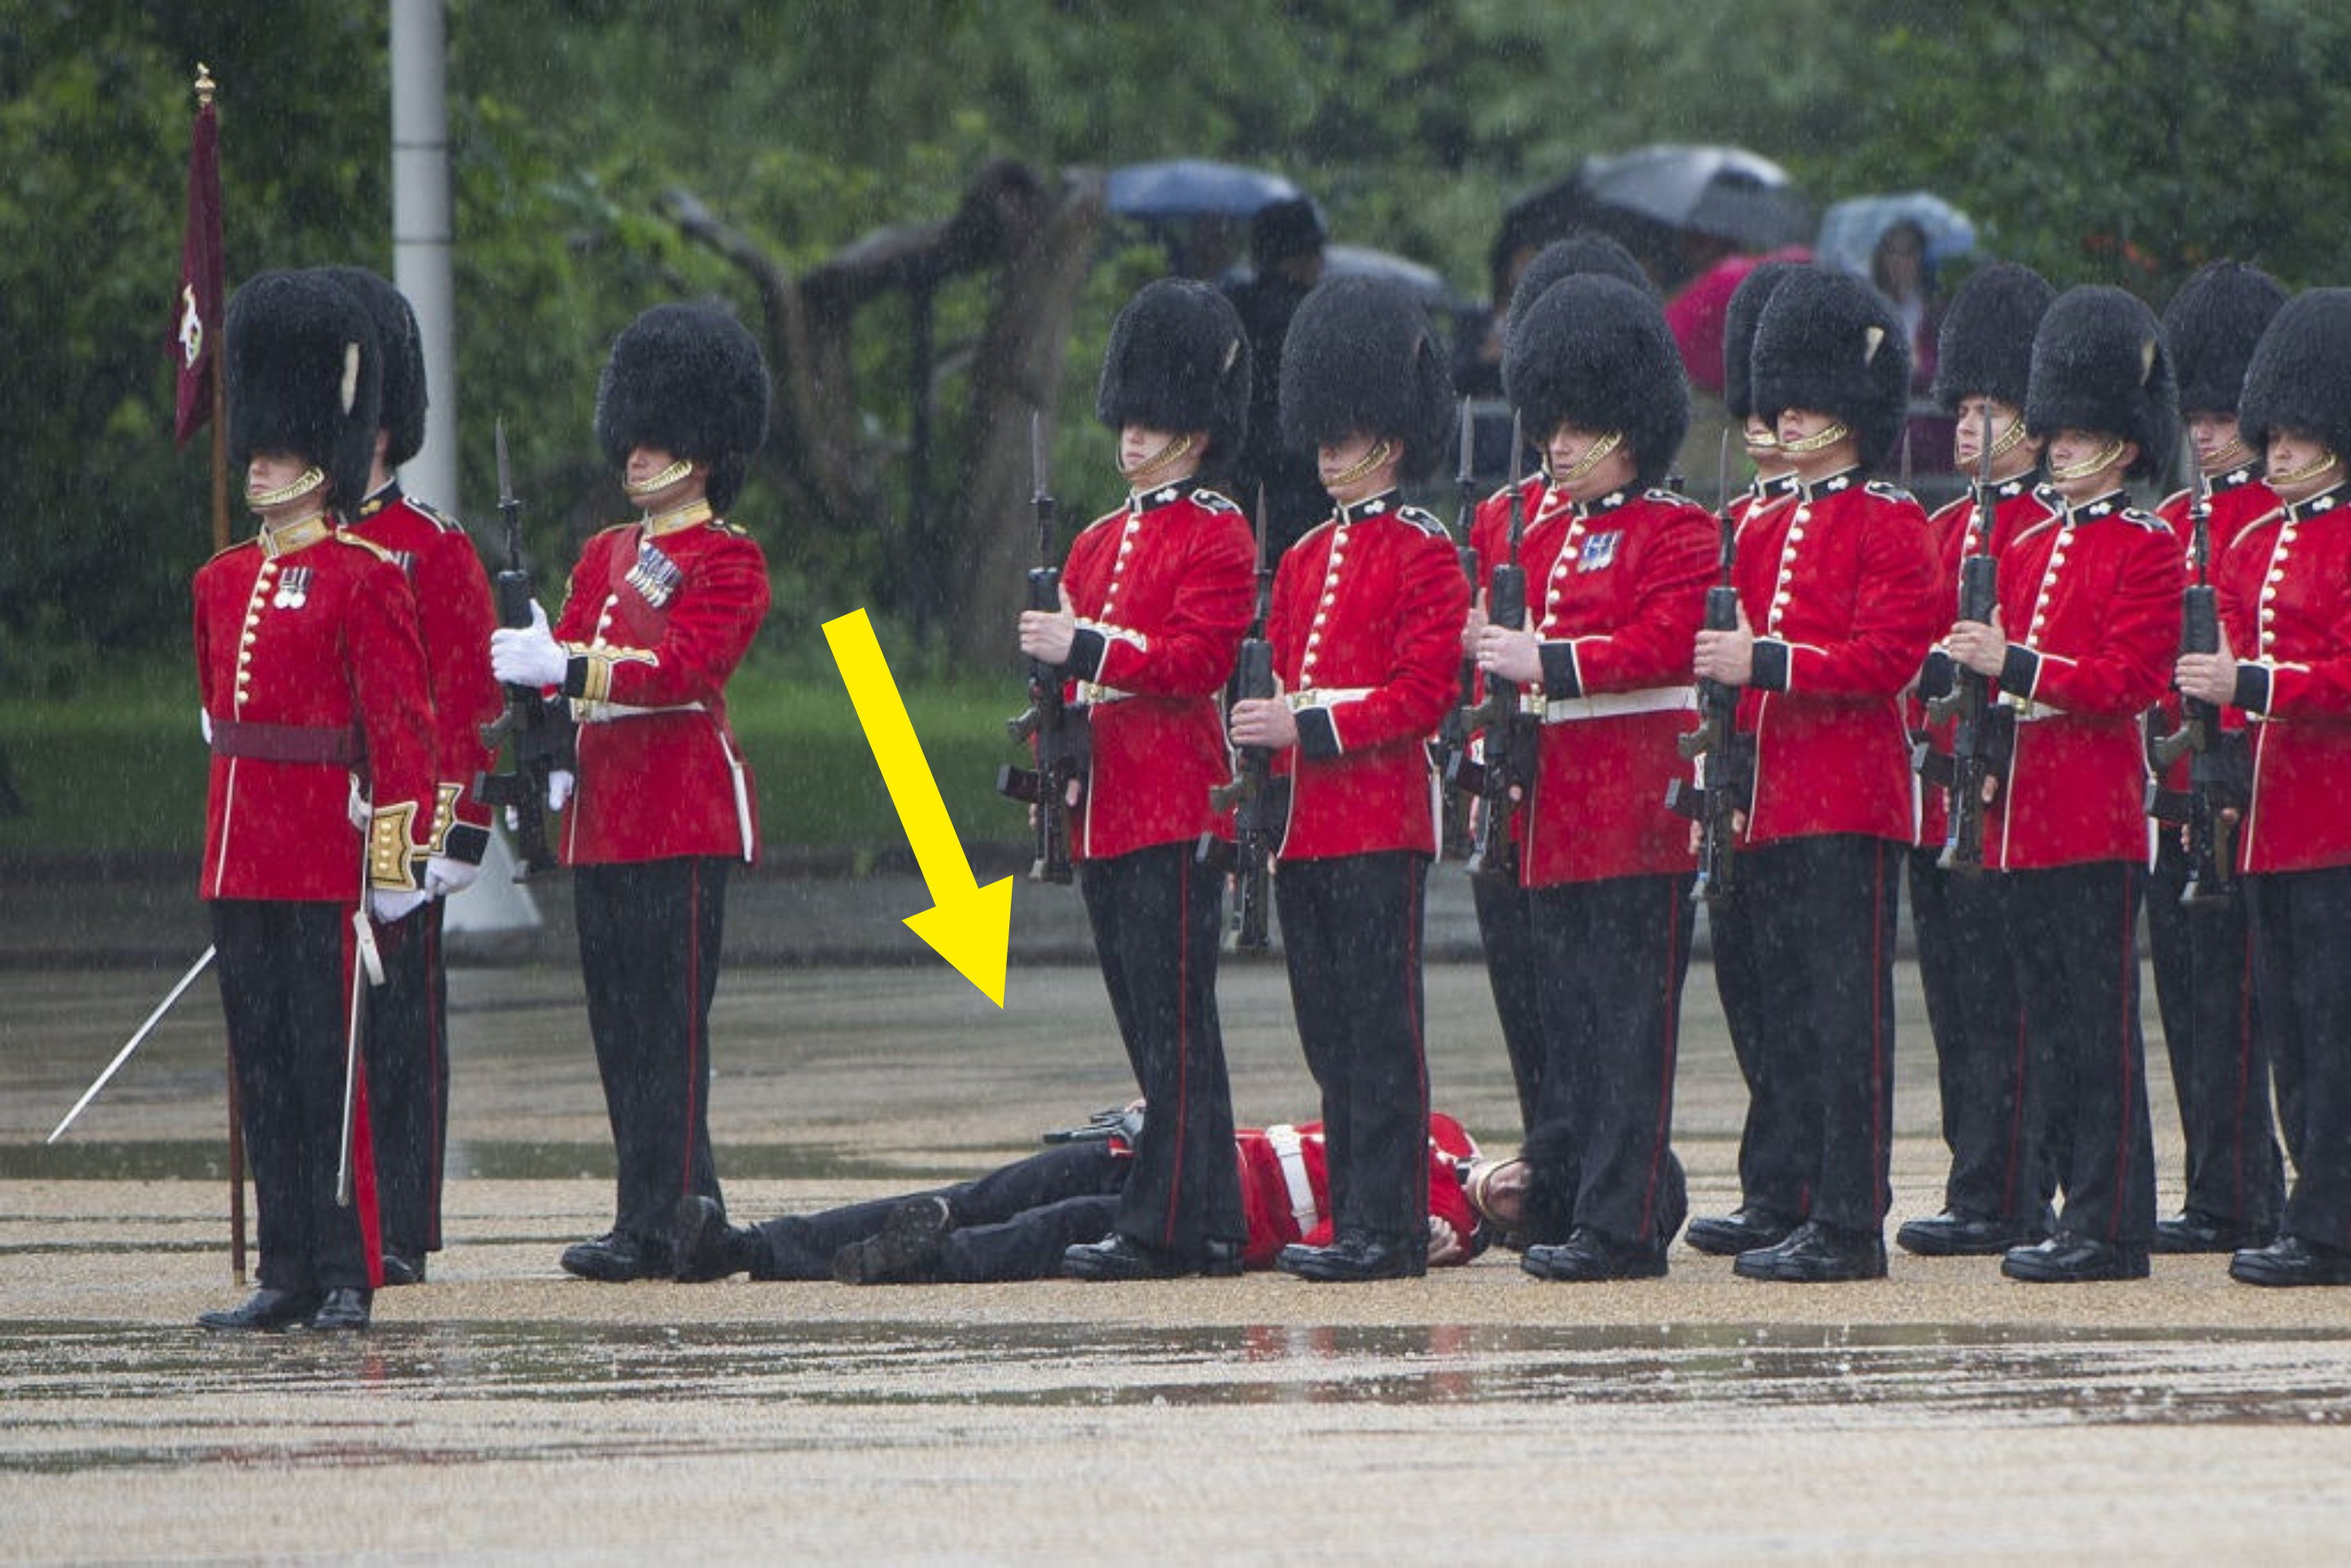 A guard laying on the ground